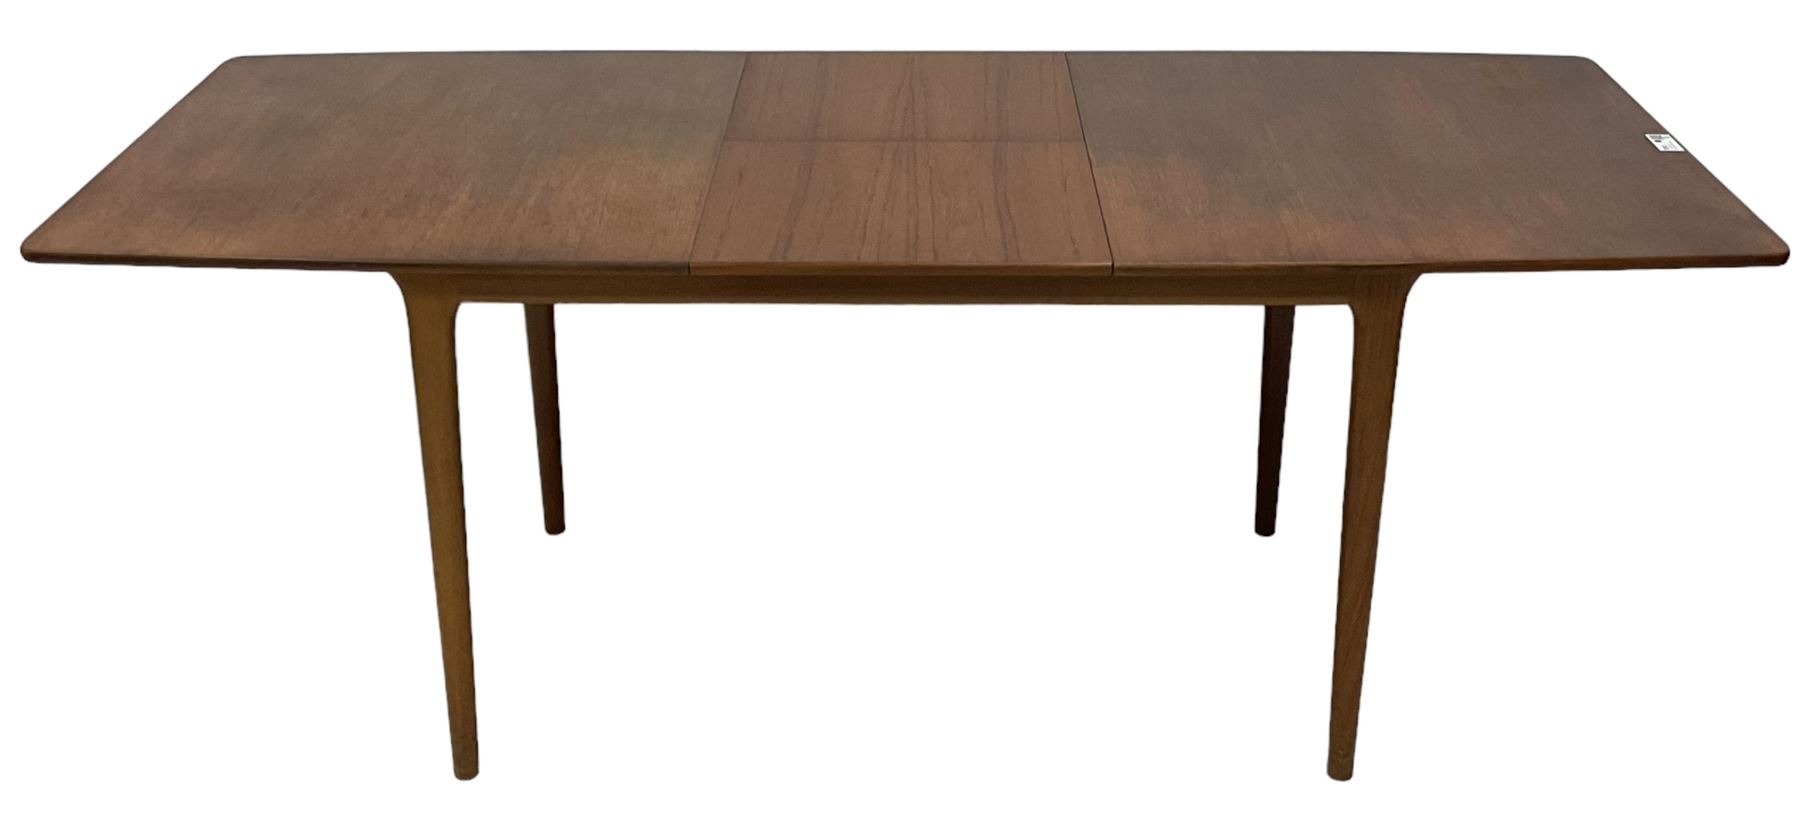 Tom Robertson for AH McIntosh & Co of Kirkaldy - mid-20th century teak extending dining table - Image 7 of 19